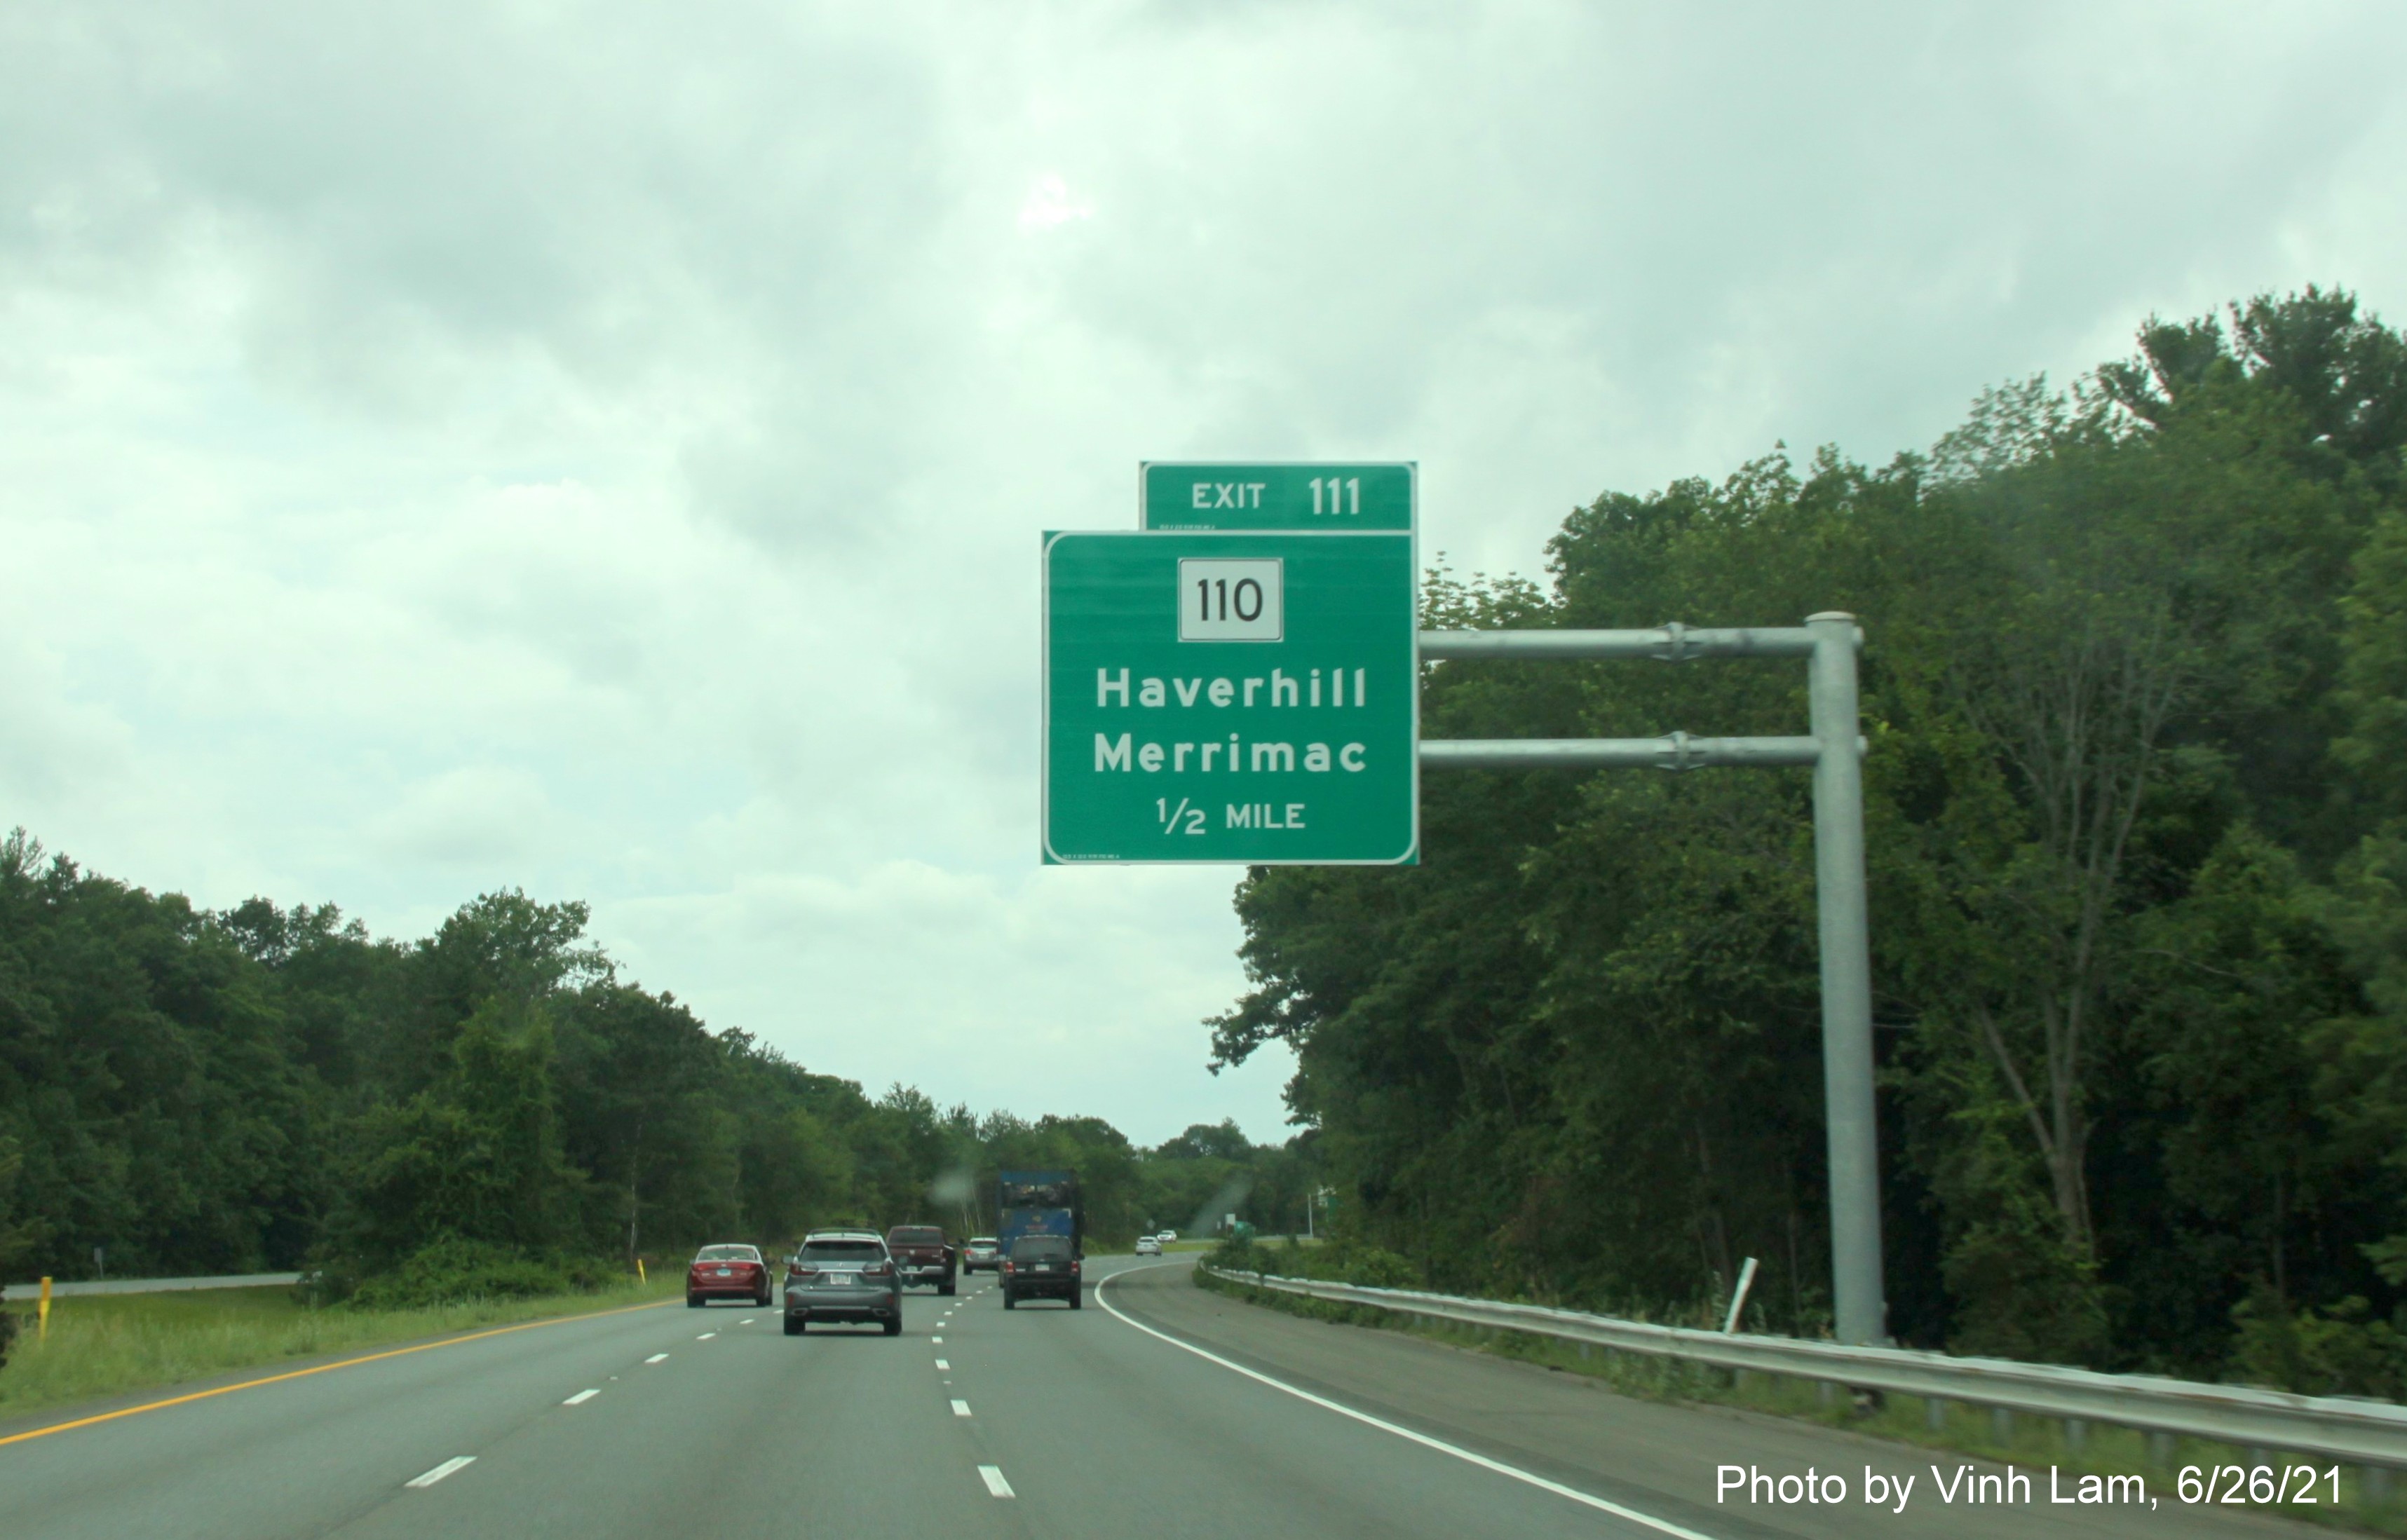 Image of 1/2 mile advance overhead sign for MA 110 exit with new milepost based exit number on I-495 South in Haverhill, photo by Vinh Lam, June 2021